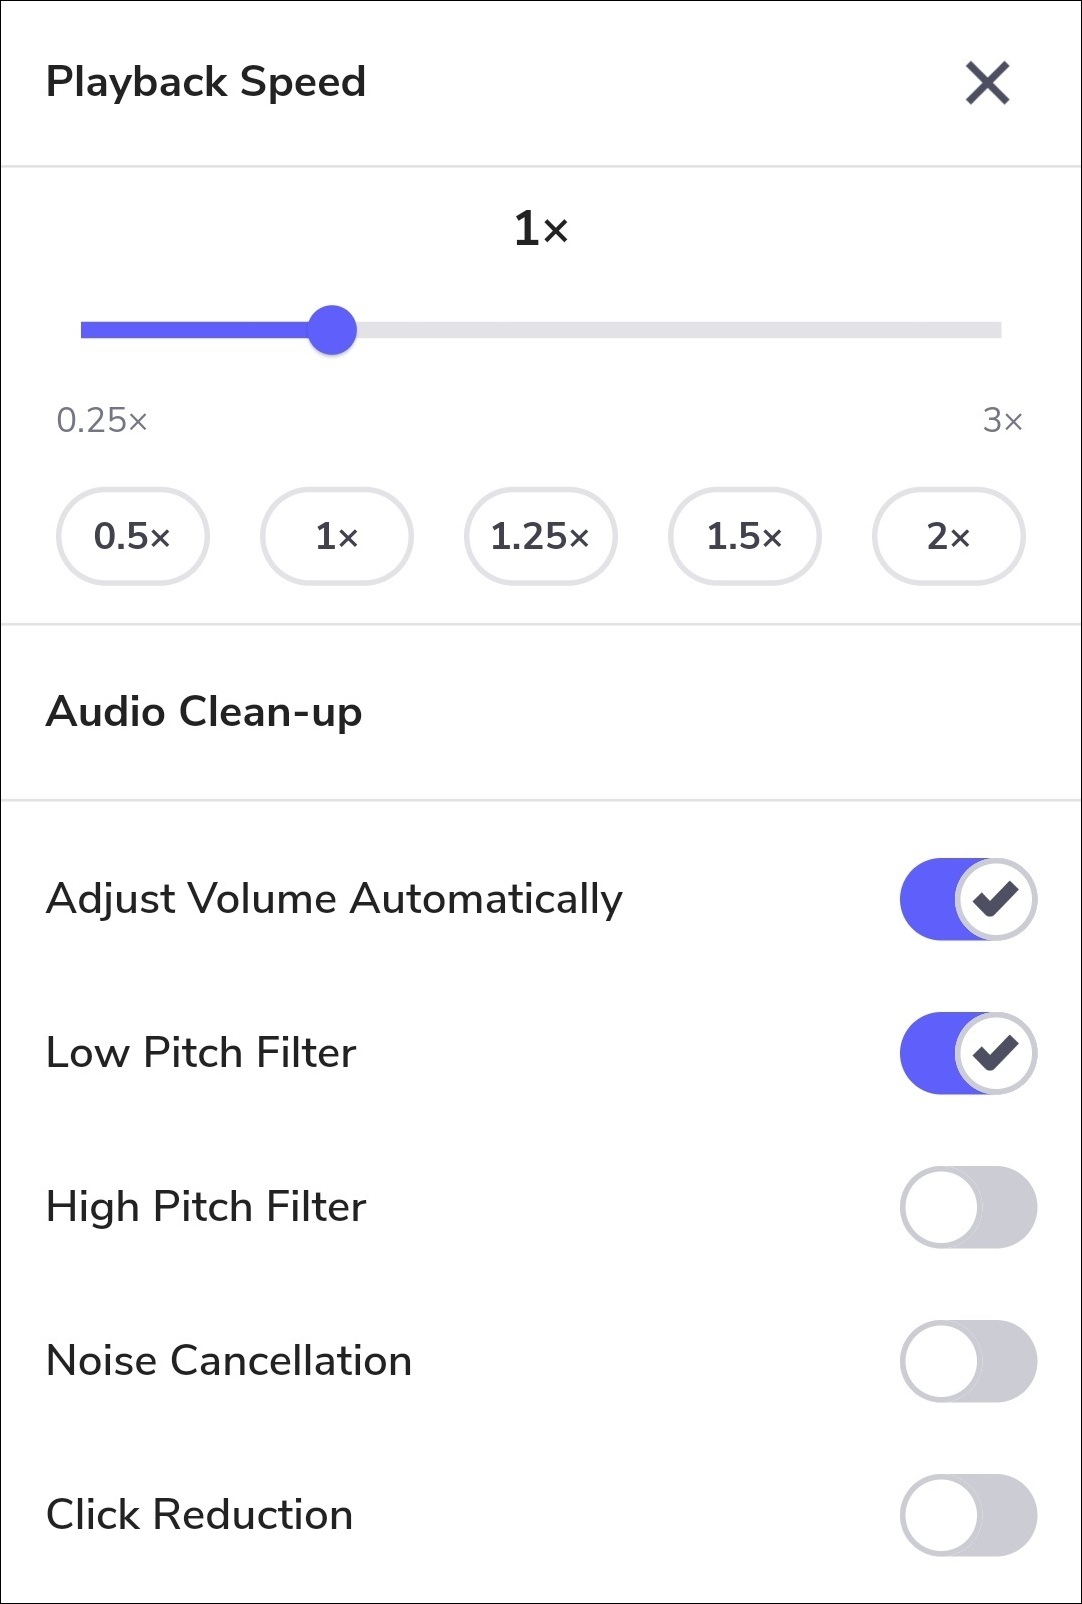 showing playback speed options of 0.5x, 1x, 1.25x, 1.5x and 2x and audio clean up functions